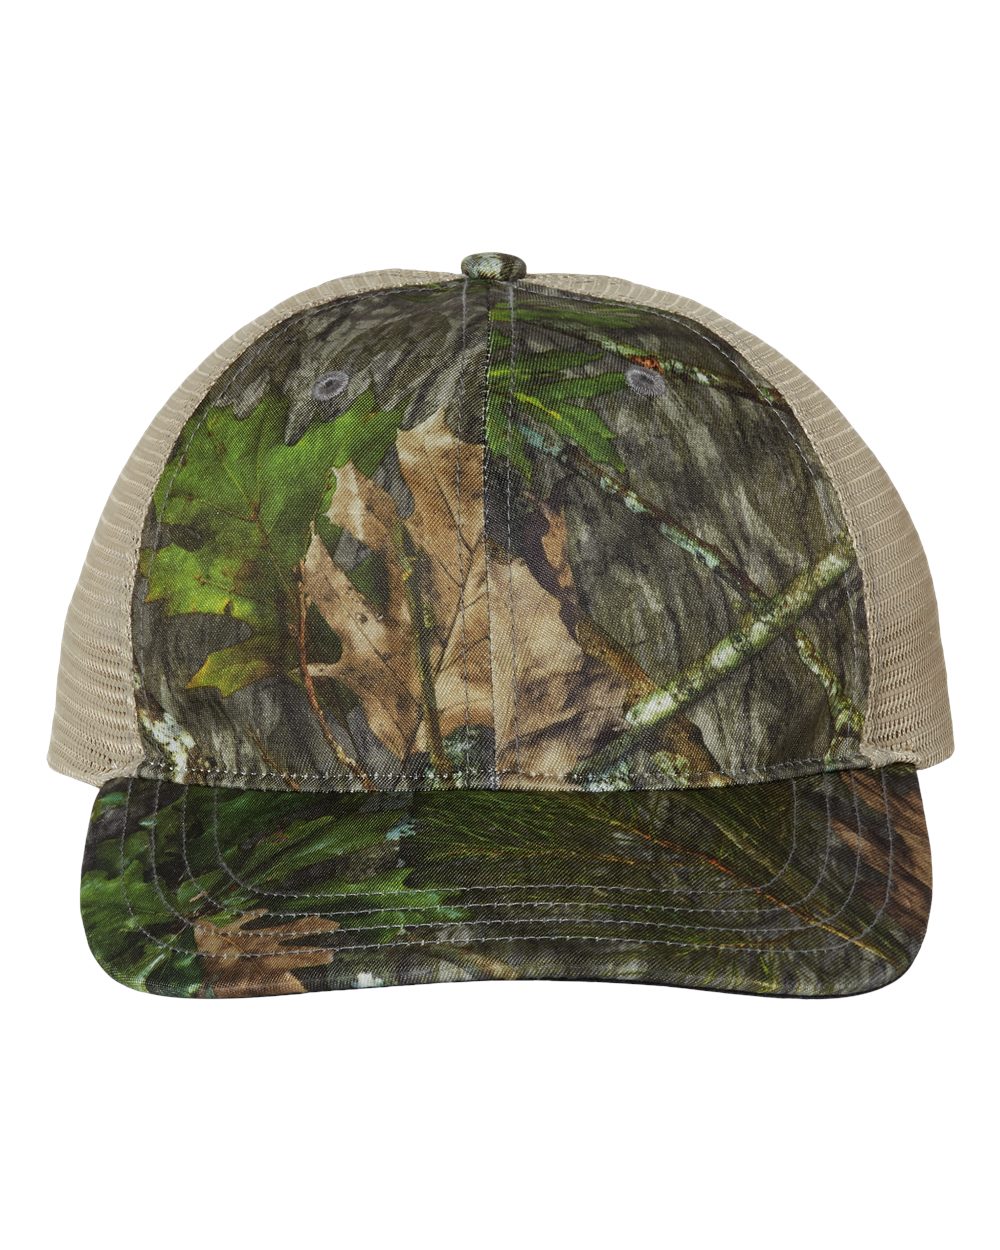 click to view Mossy Oak Obsession/Khaki